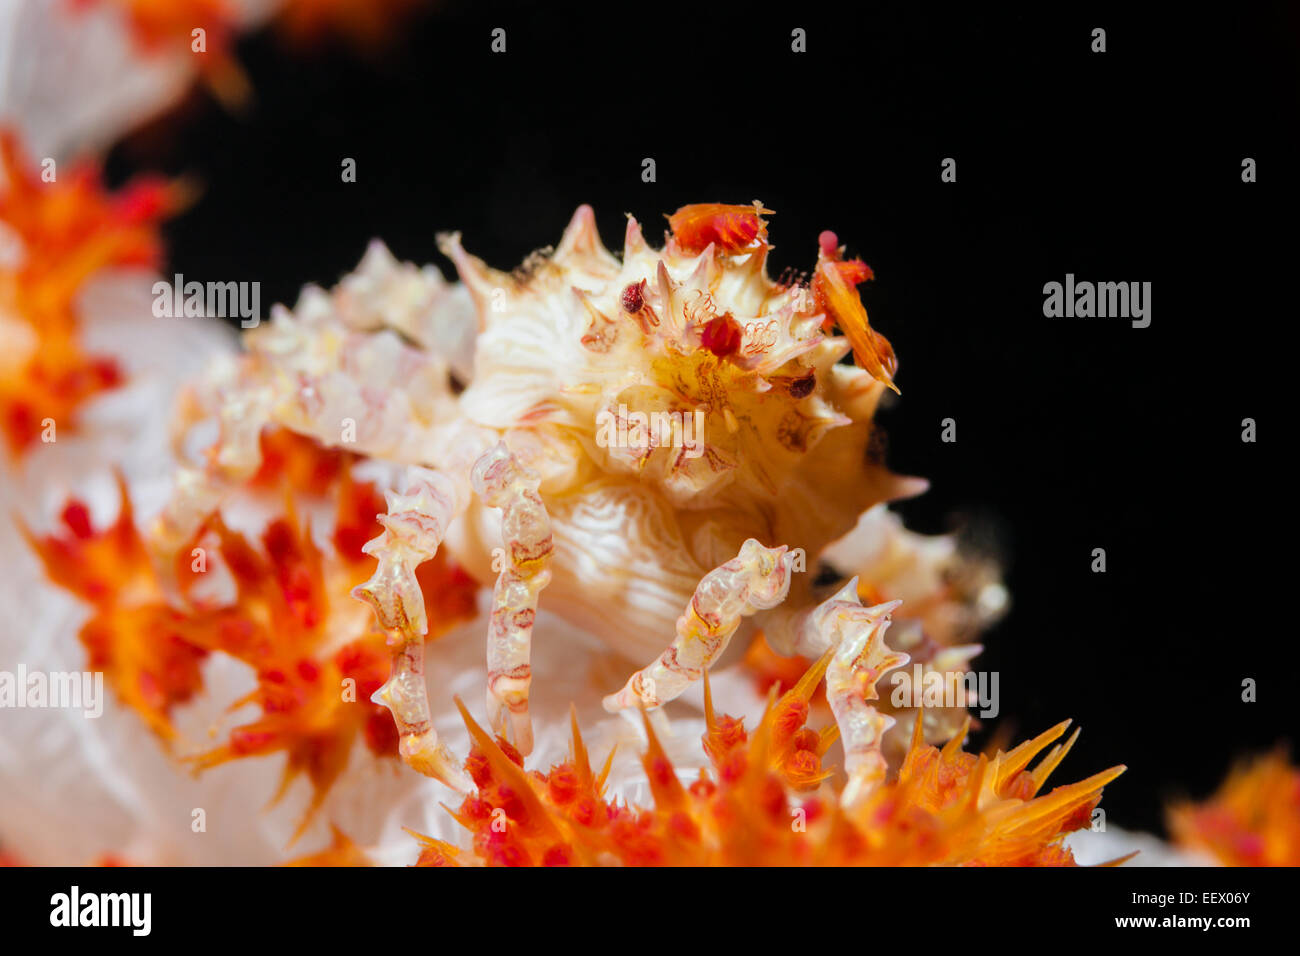 Soft Coral Spider Crab, Hoplophrys oatesii, Ambon, Moluccas, Indonesia Stock Photo